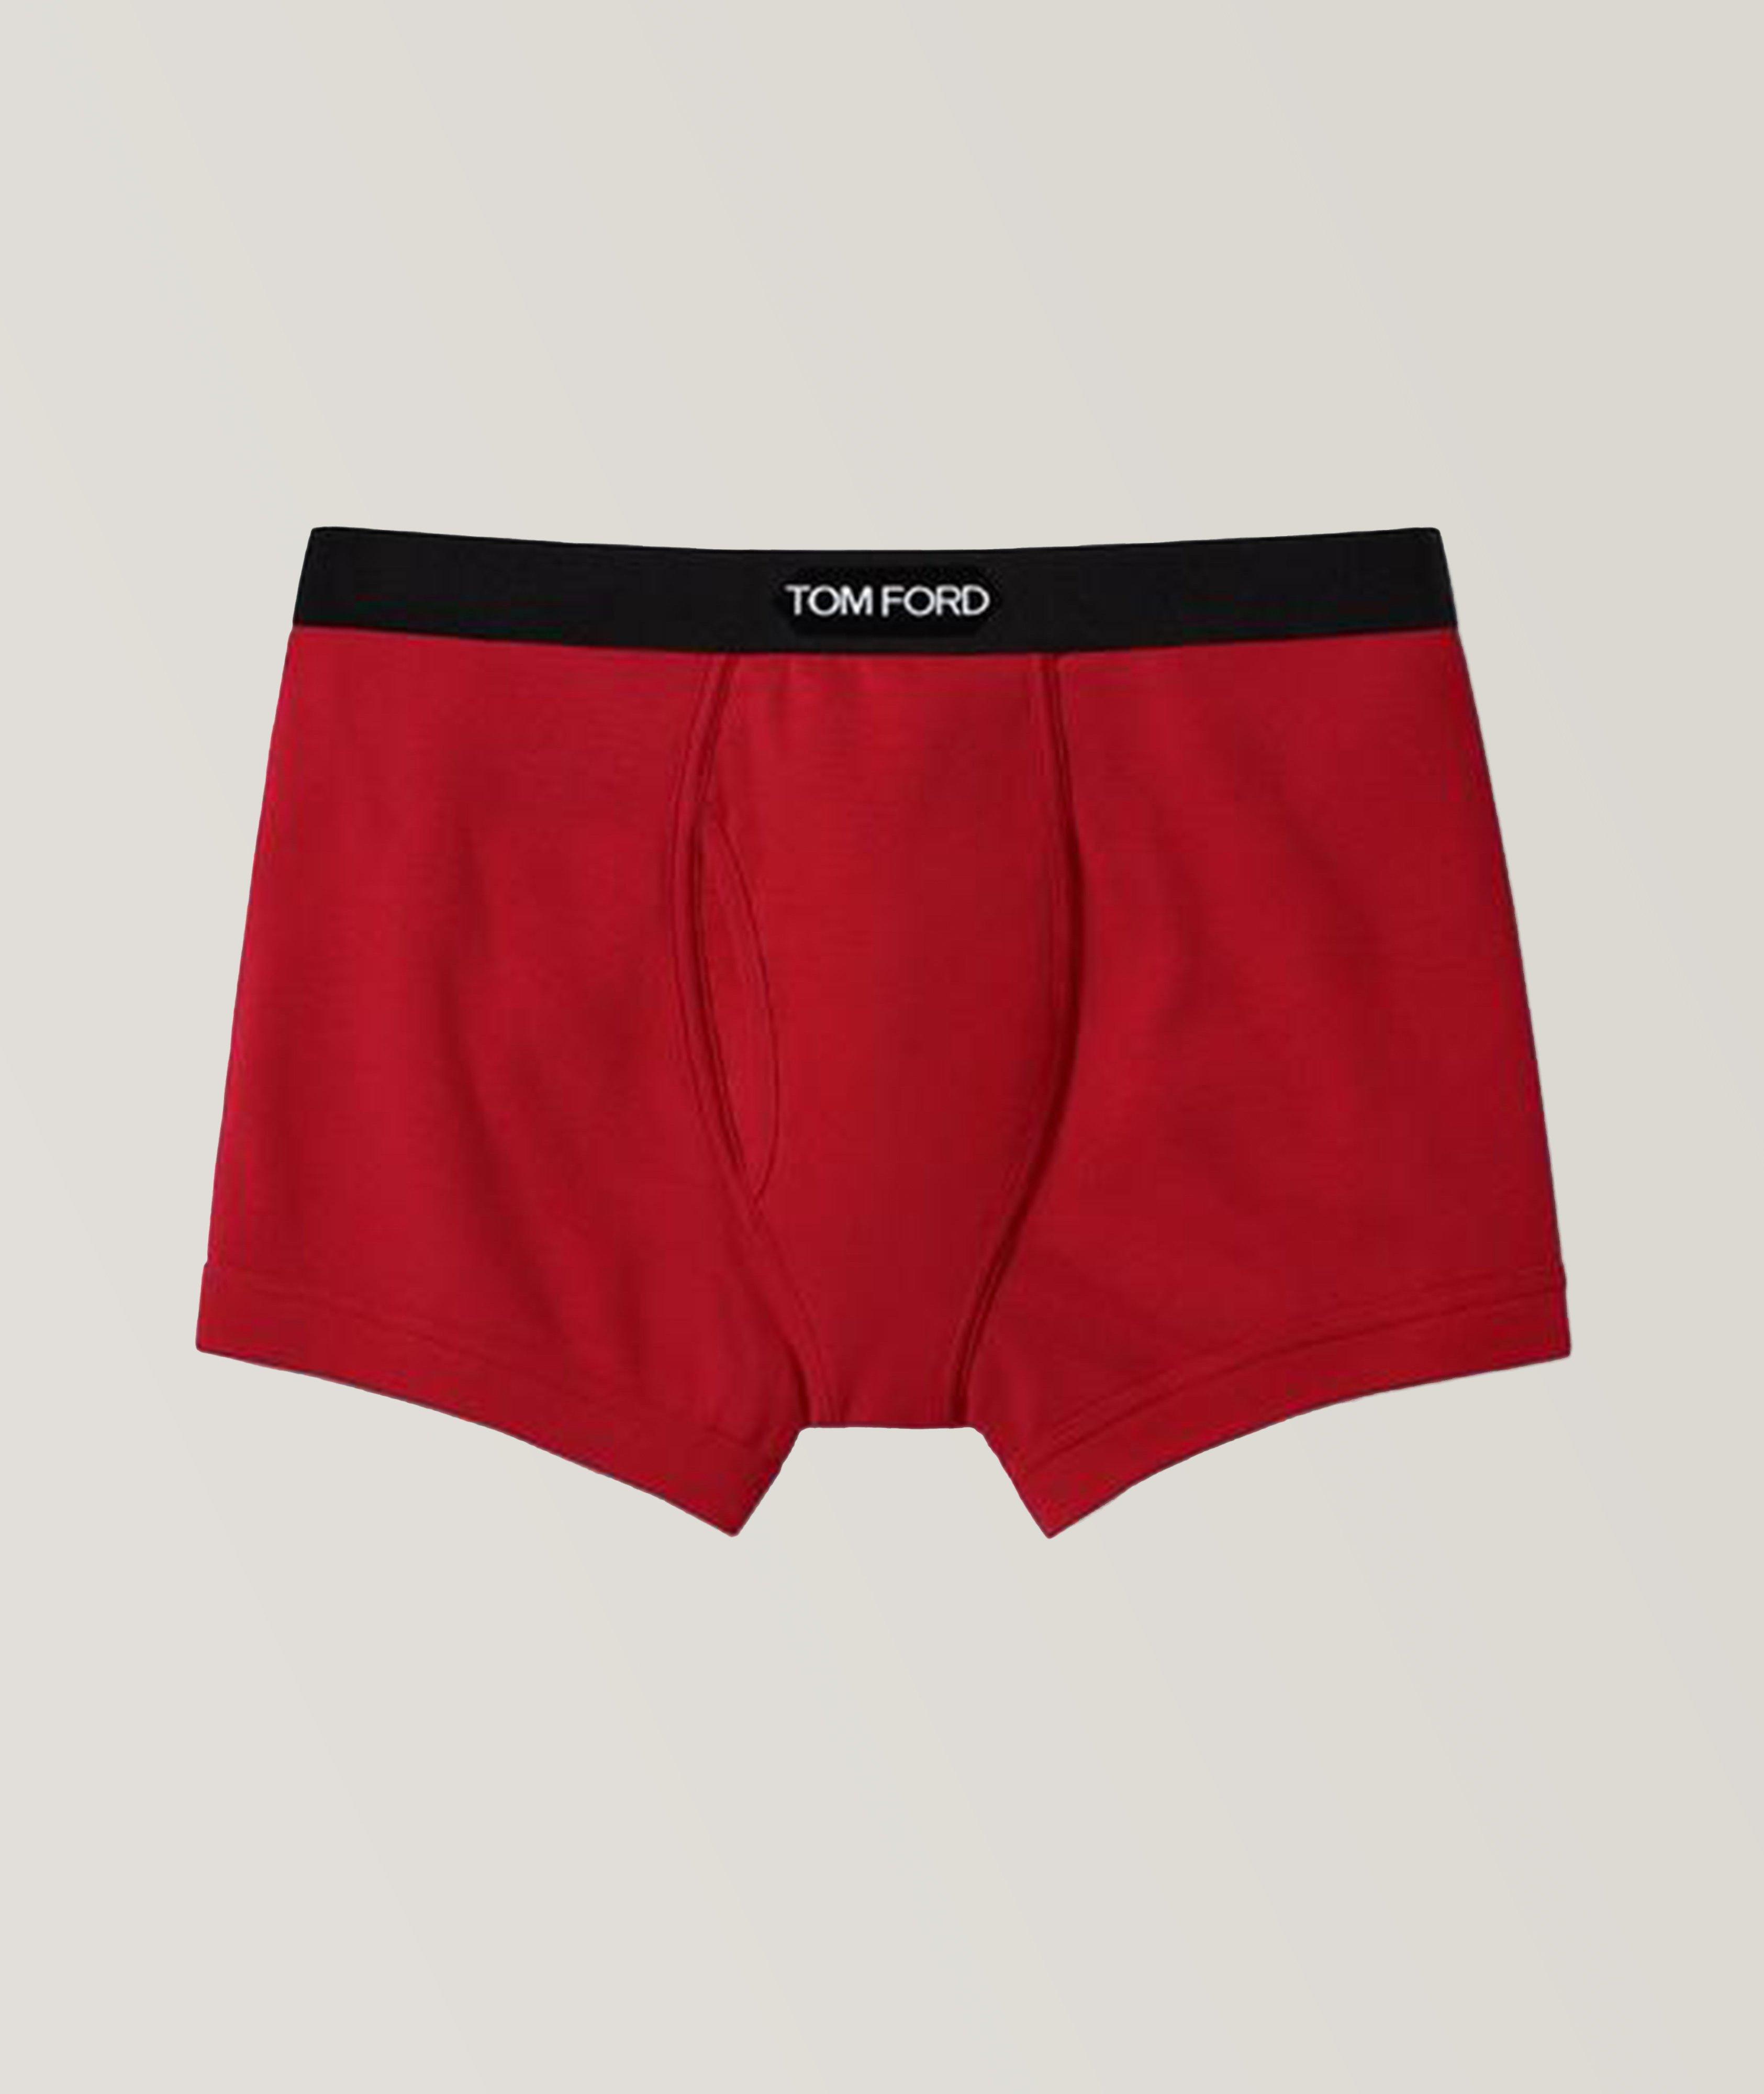 TOM FORD Jersey Cotton Boxer Briefs